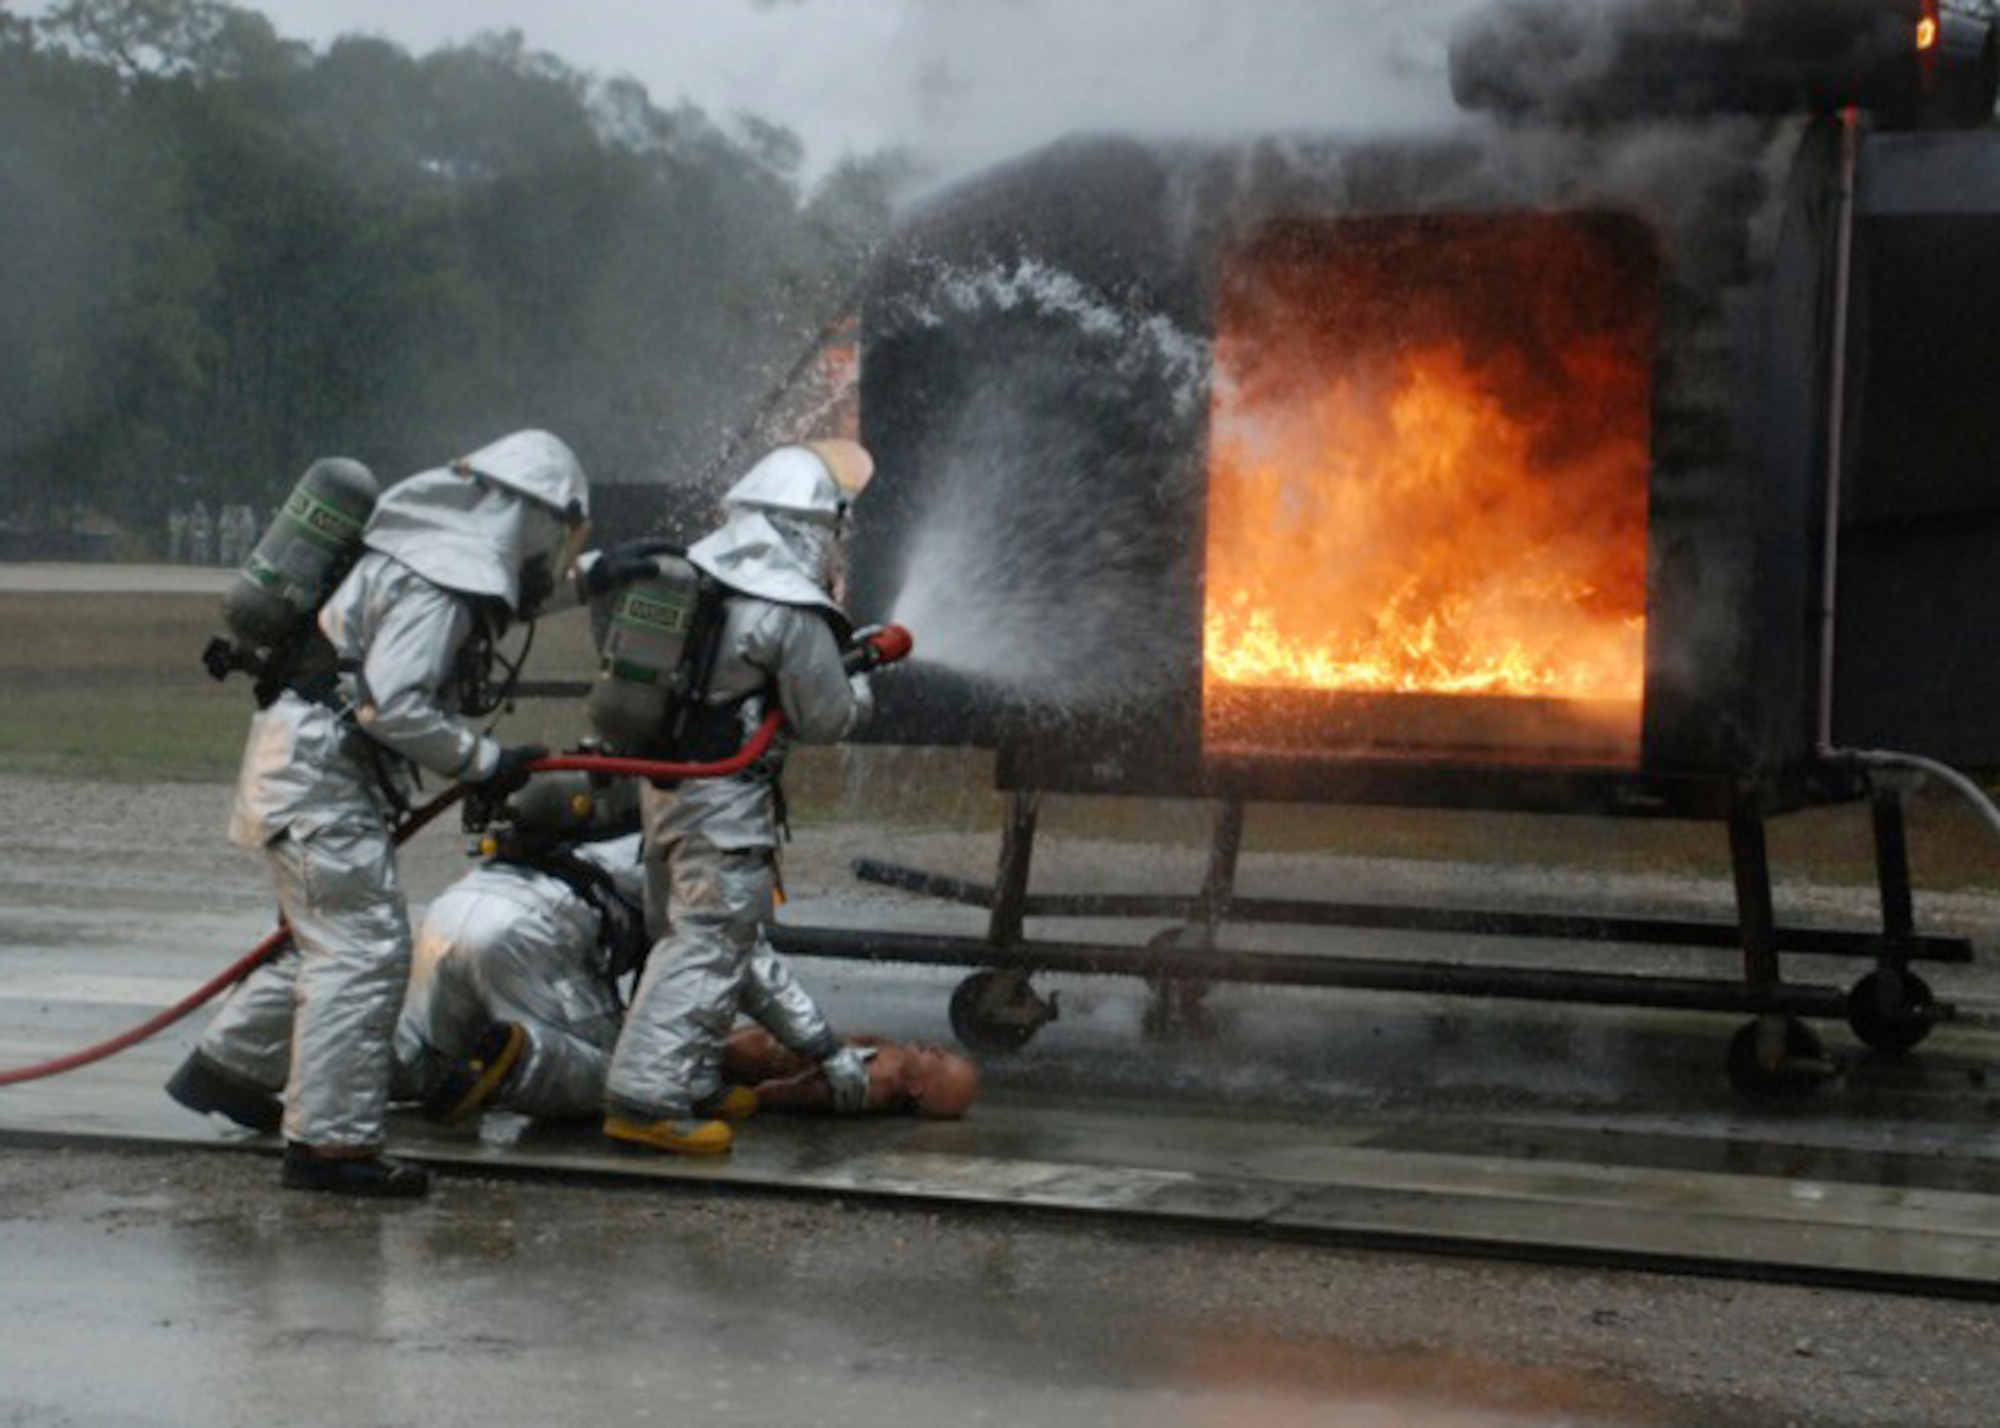 TYNDALL AIR FORCE BASE, Fla. -- Fire fighters from the 176 Civil Engineer Squadron extinguish a simulated aircraft fire during a Silver Flag training exercise here in February.The air guardsmen were part of a 175-man class of engineers and support personnel.